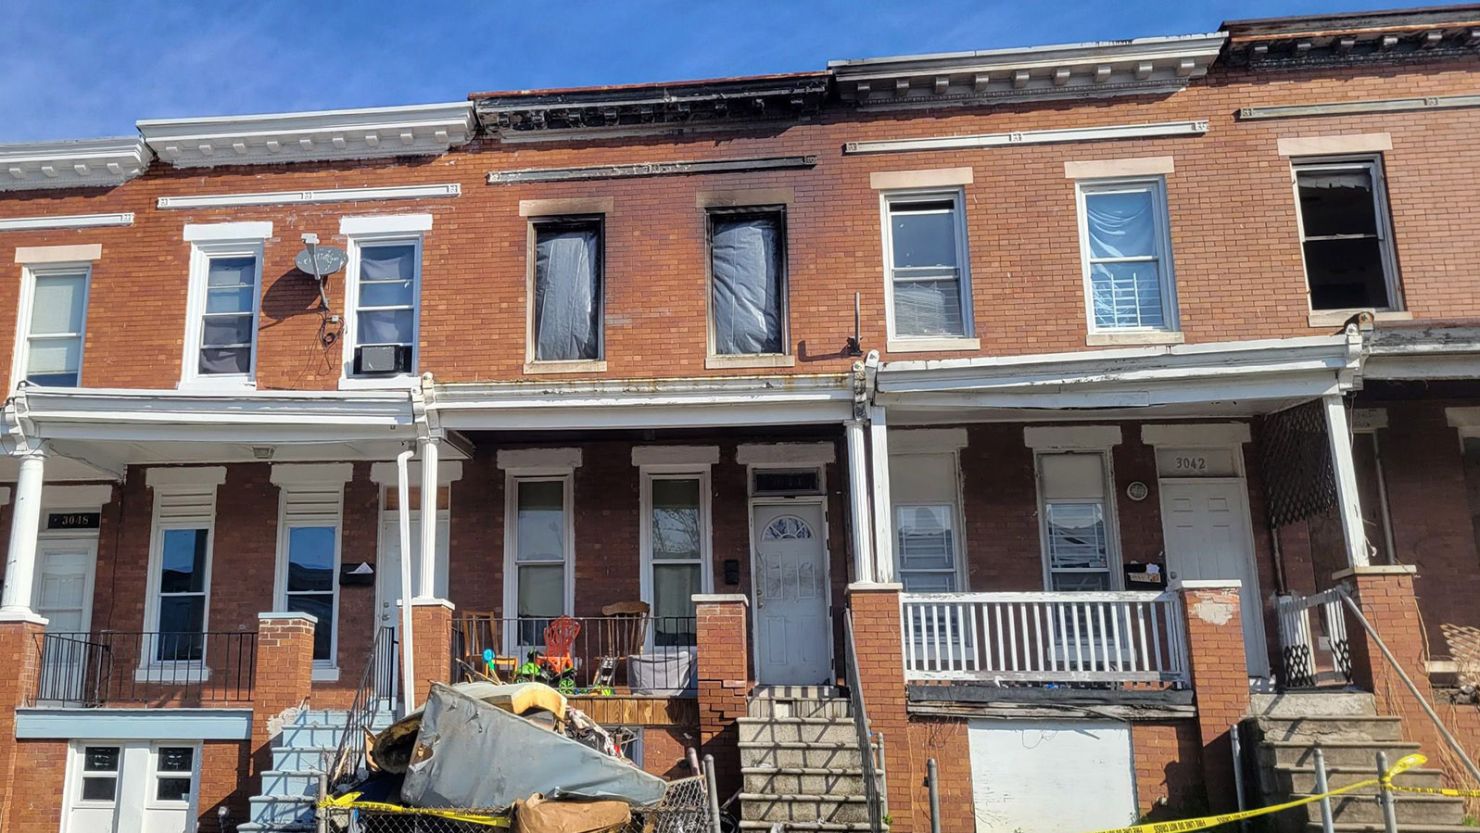 Firefighters rescued five critically injured people from a pre-dawn fire in Baltimore. Three of the victims were children, who later died of their injuries.